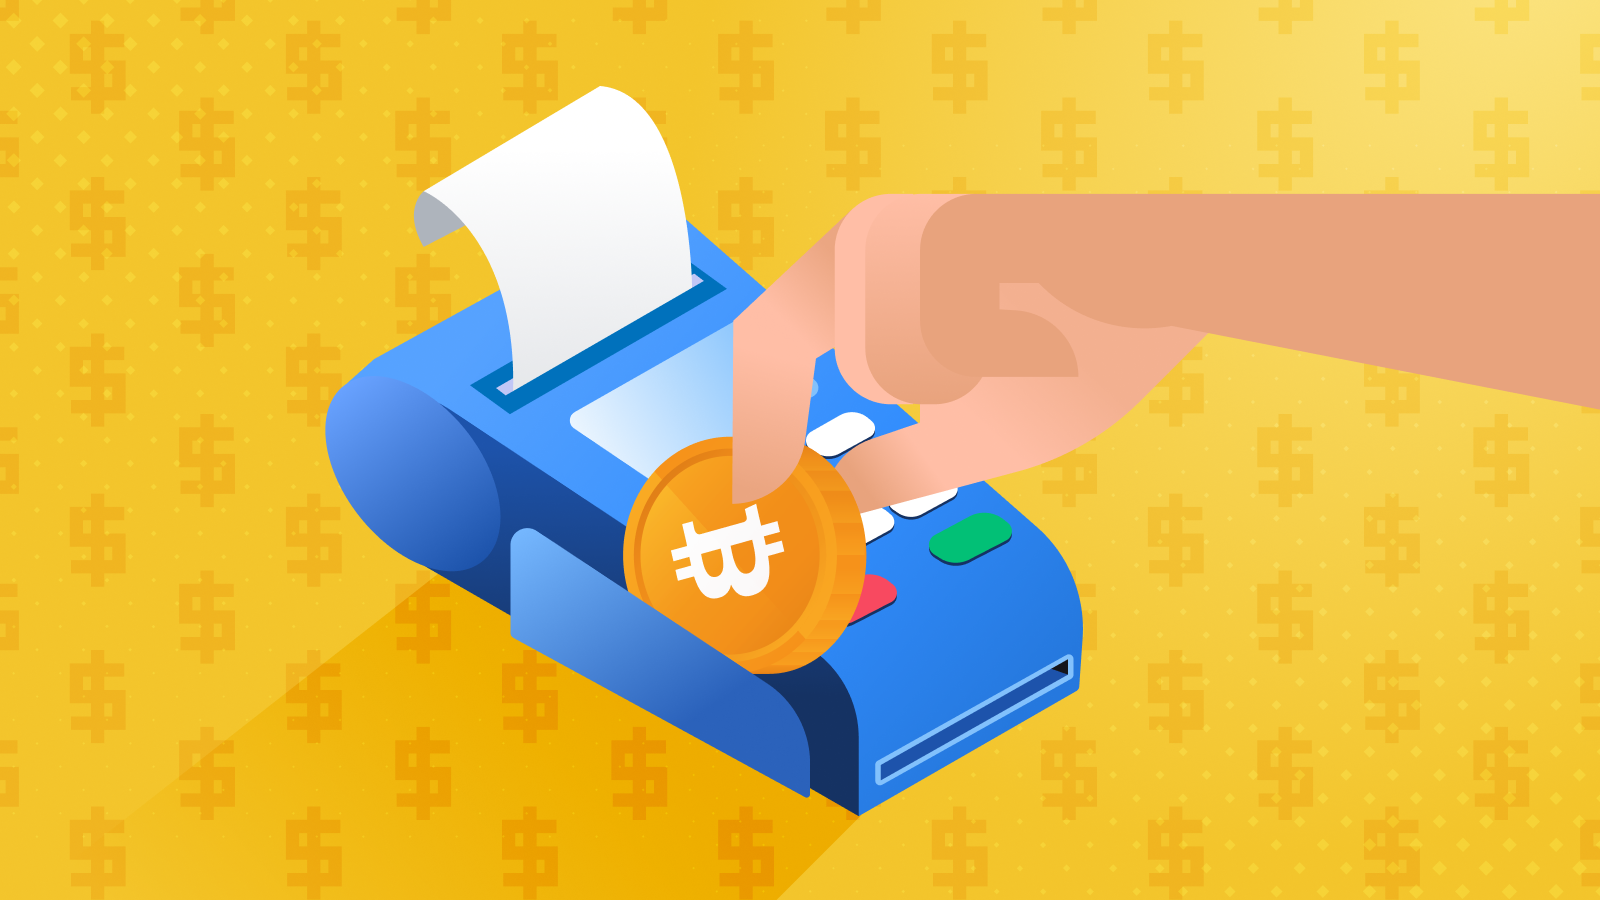 We accept crypto as an alternative way of making payments. Processing payments became easier now